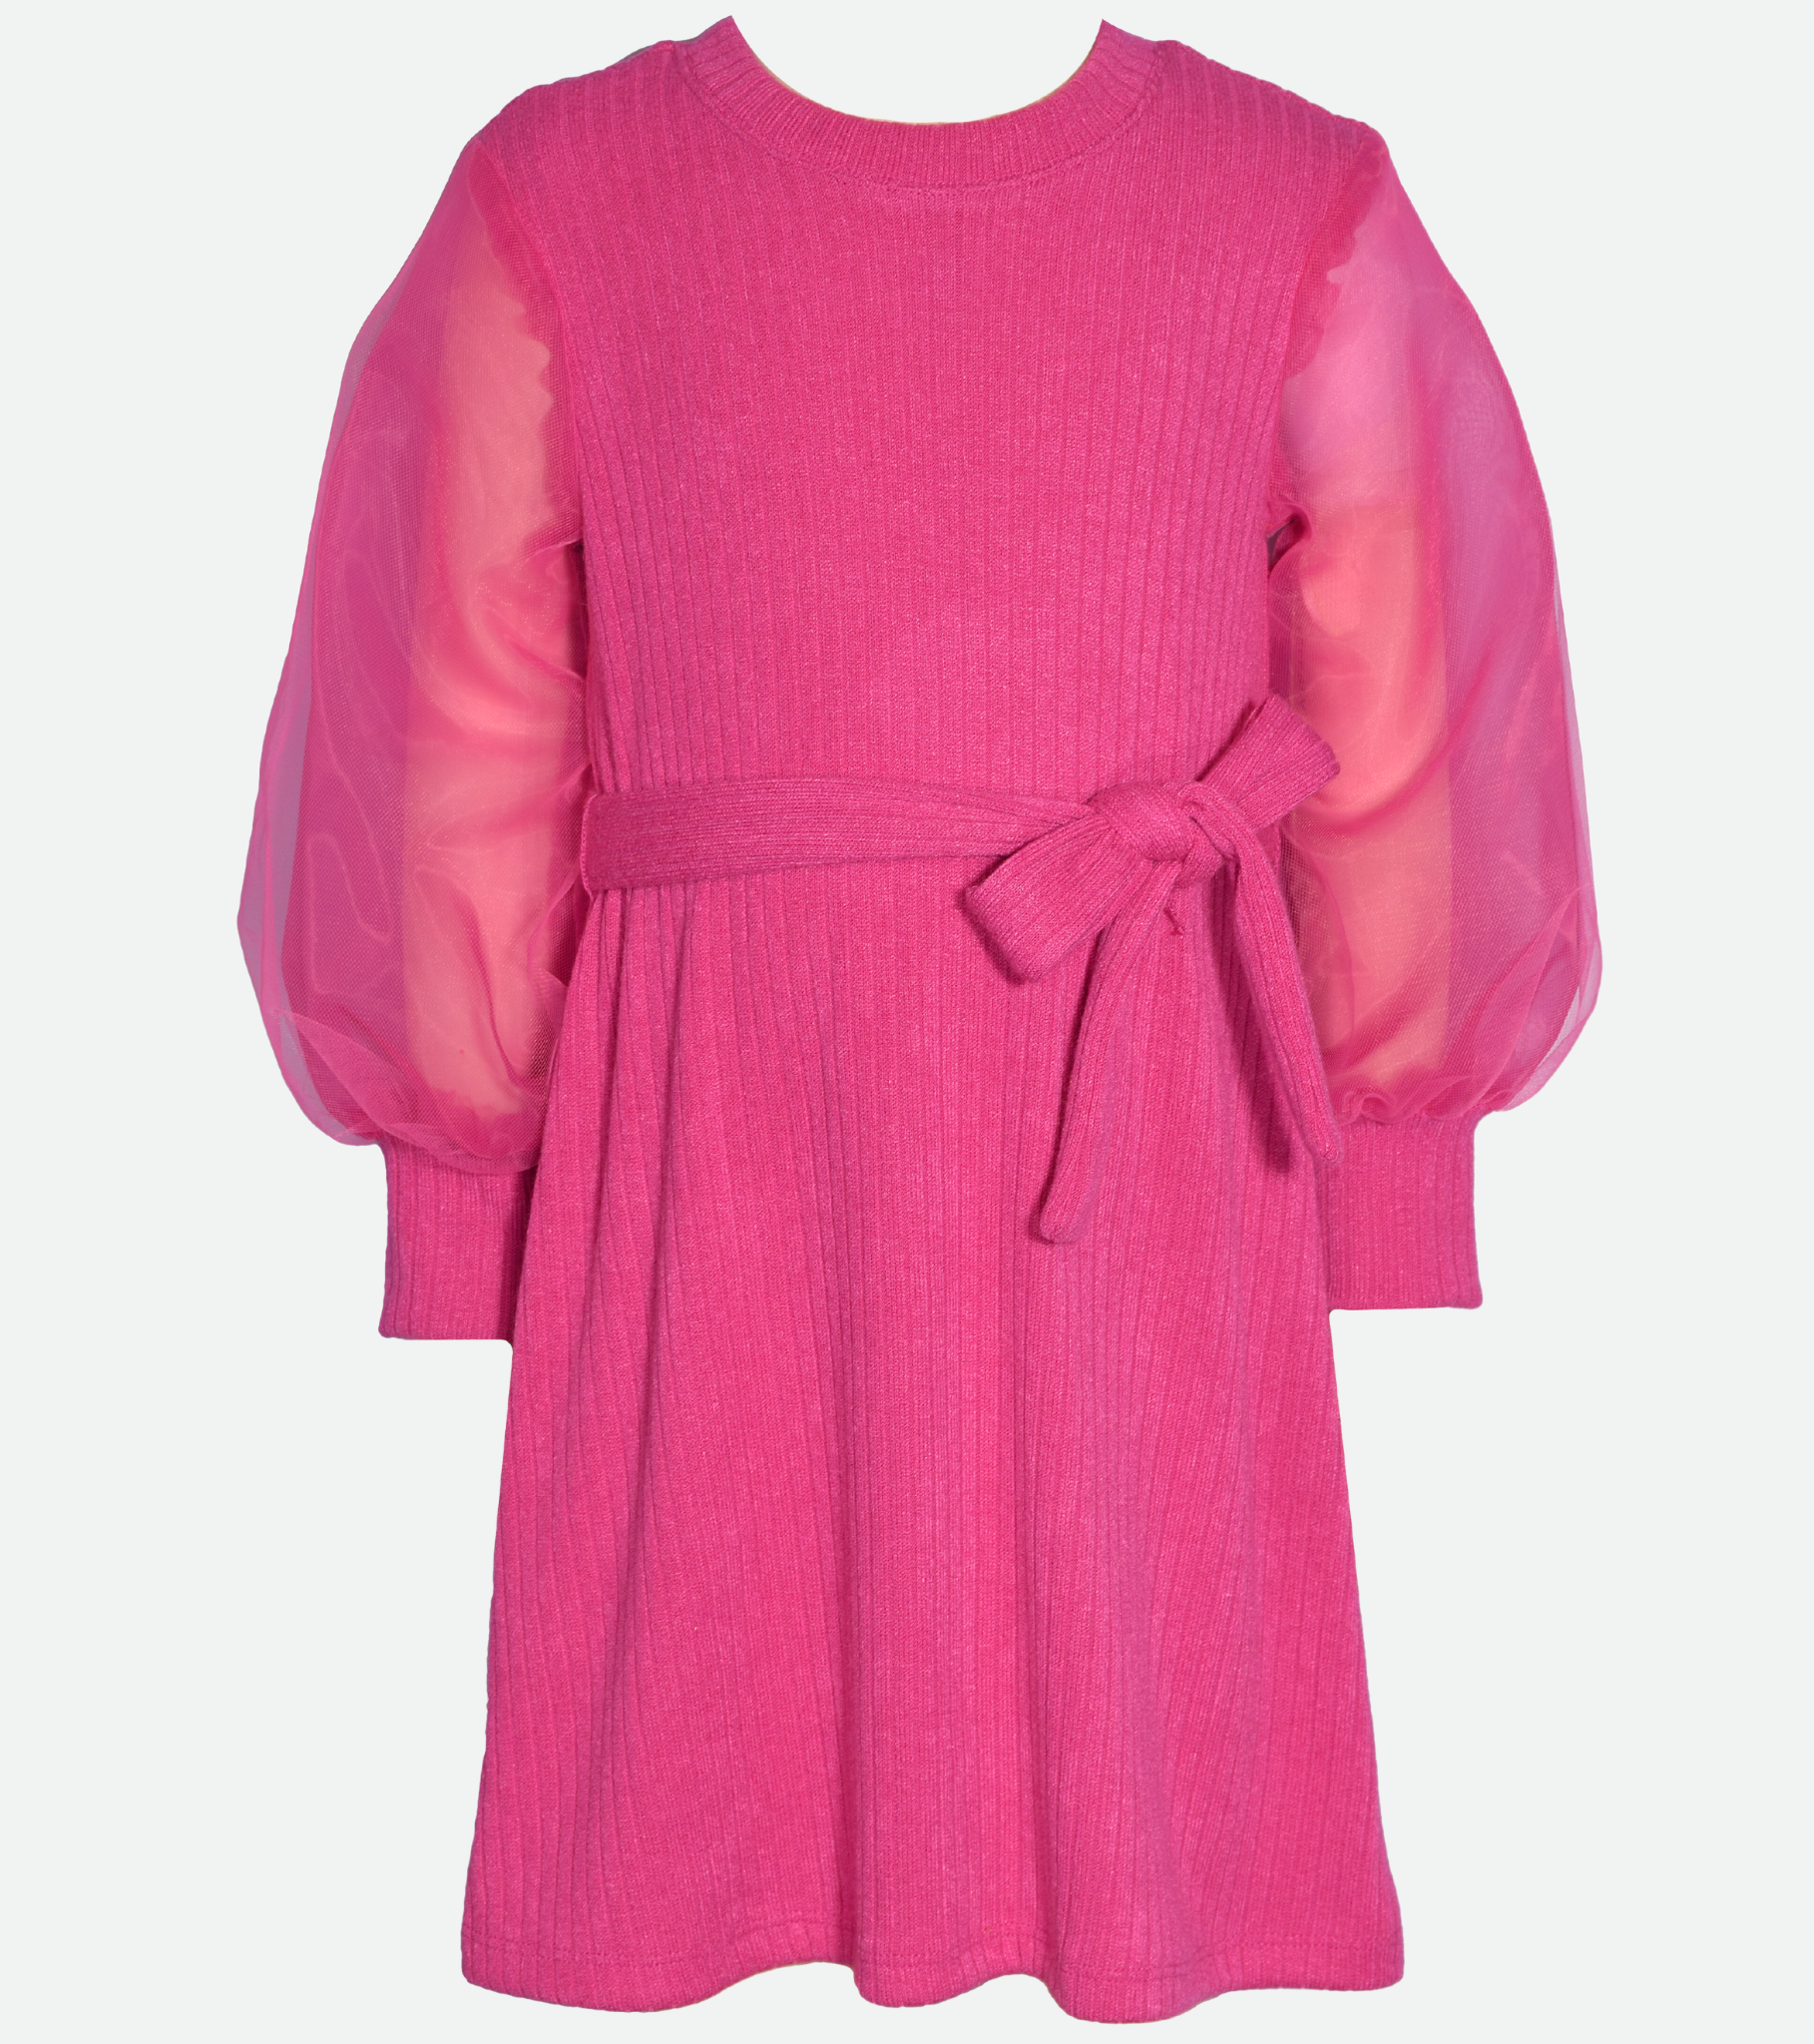 H&M Pink Dress Studio Collection Size M /SOLD OUT